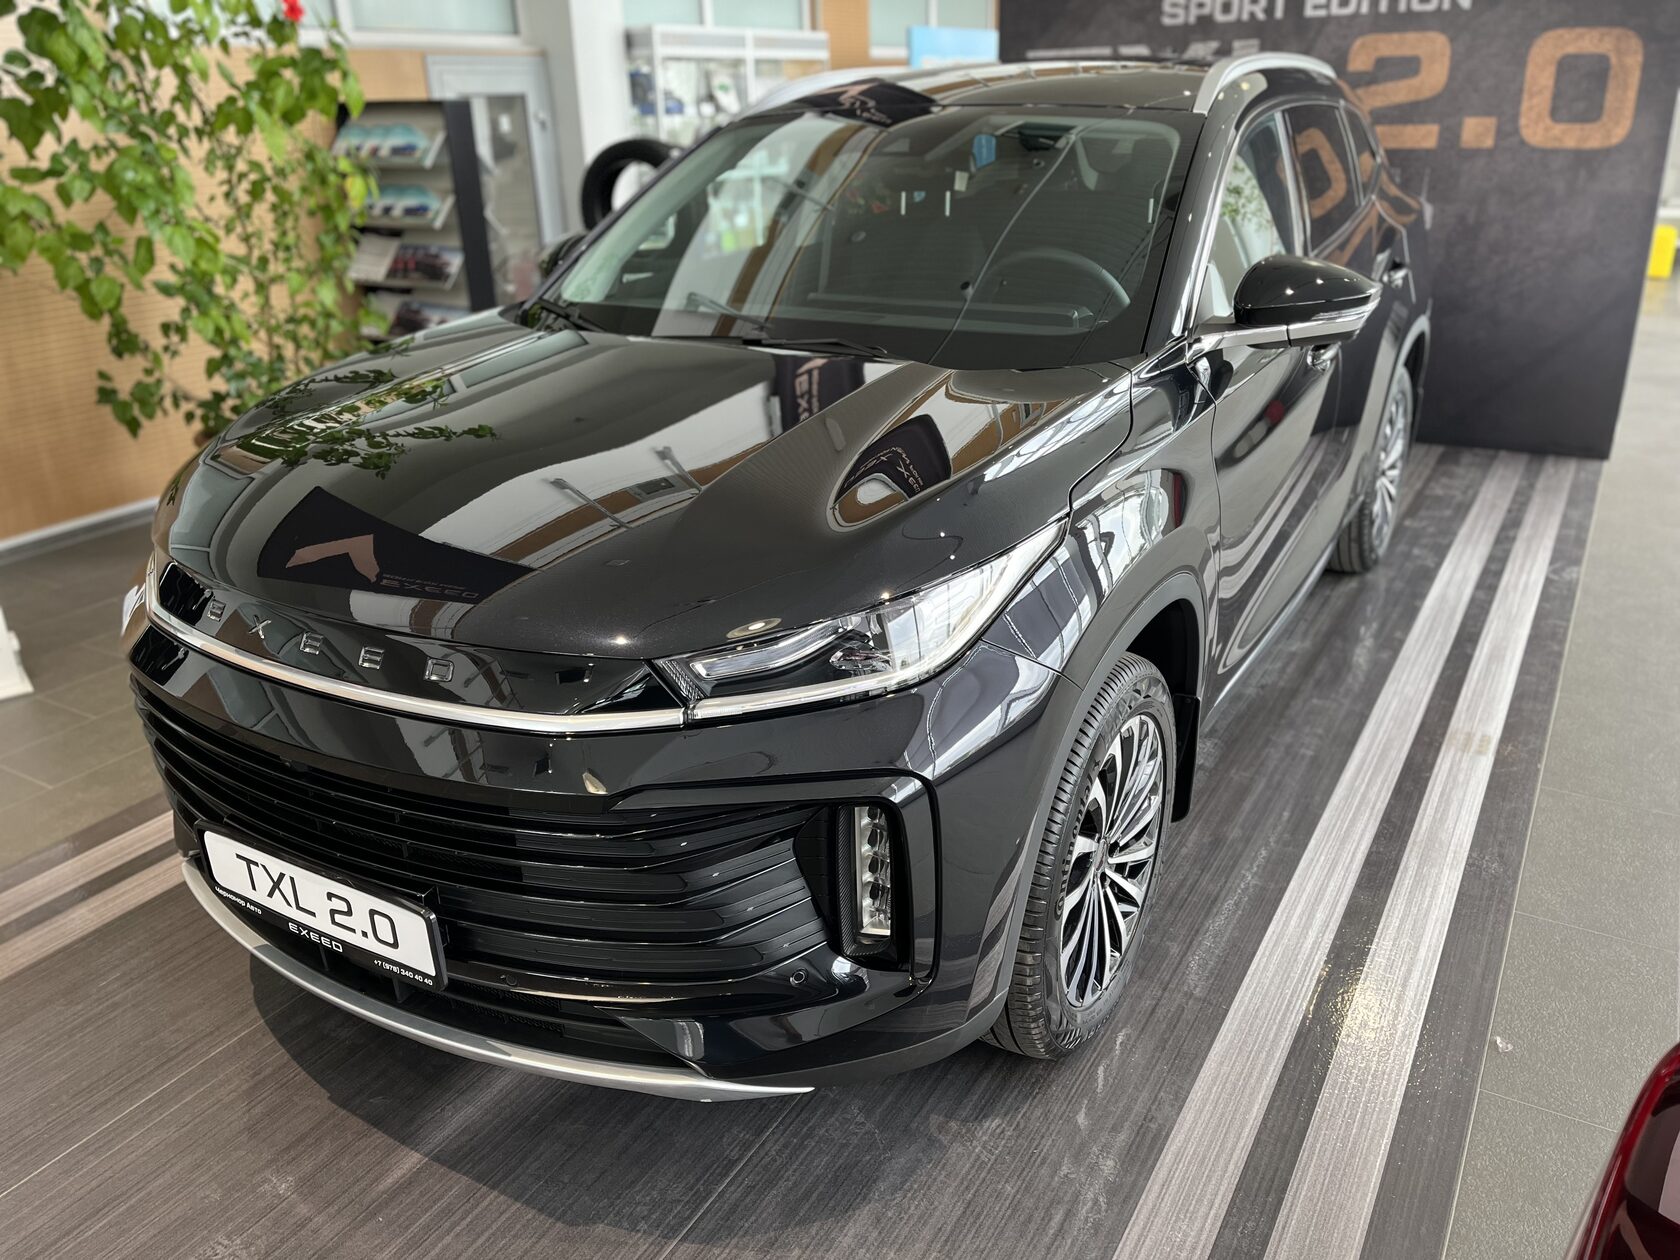 Exceed sport edition. Exeed TXL 2022 Sport Edition. Chery exceed TXL 2022 2.0 Sport Edition. Эксид ТХЛ 2.0 2022. Exceed TXL Sport Edition 2022.